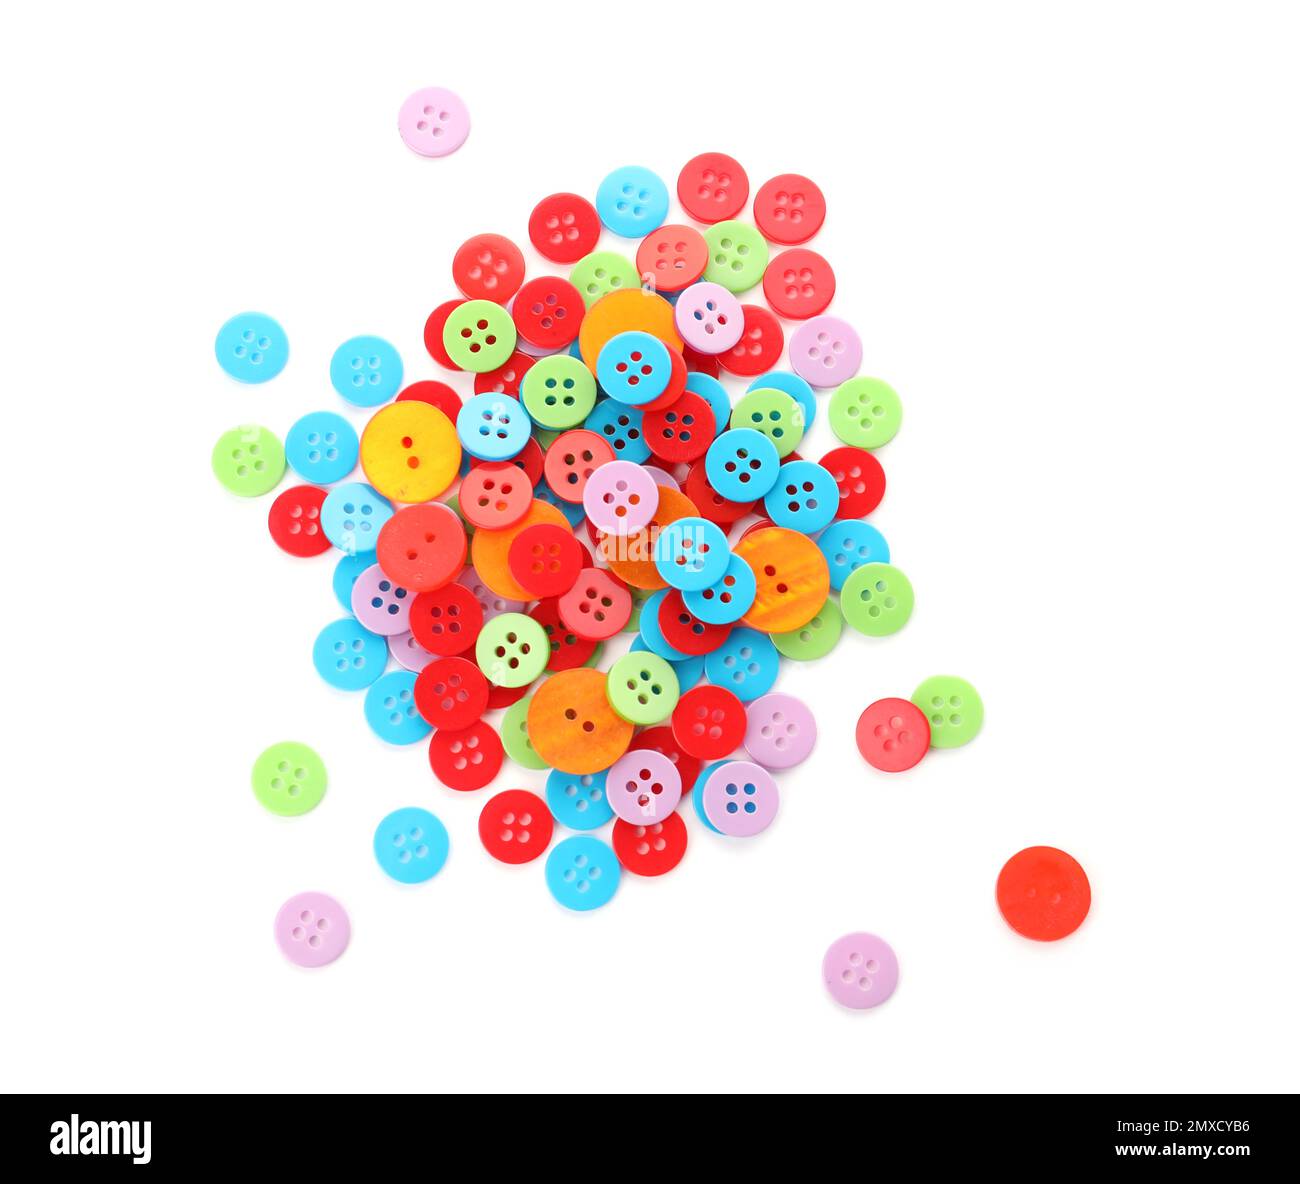 Colorful buttons isolated on a white background Stock Photo by innu_asha84